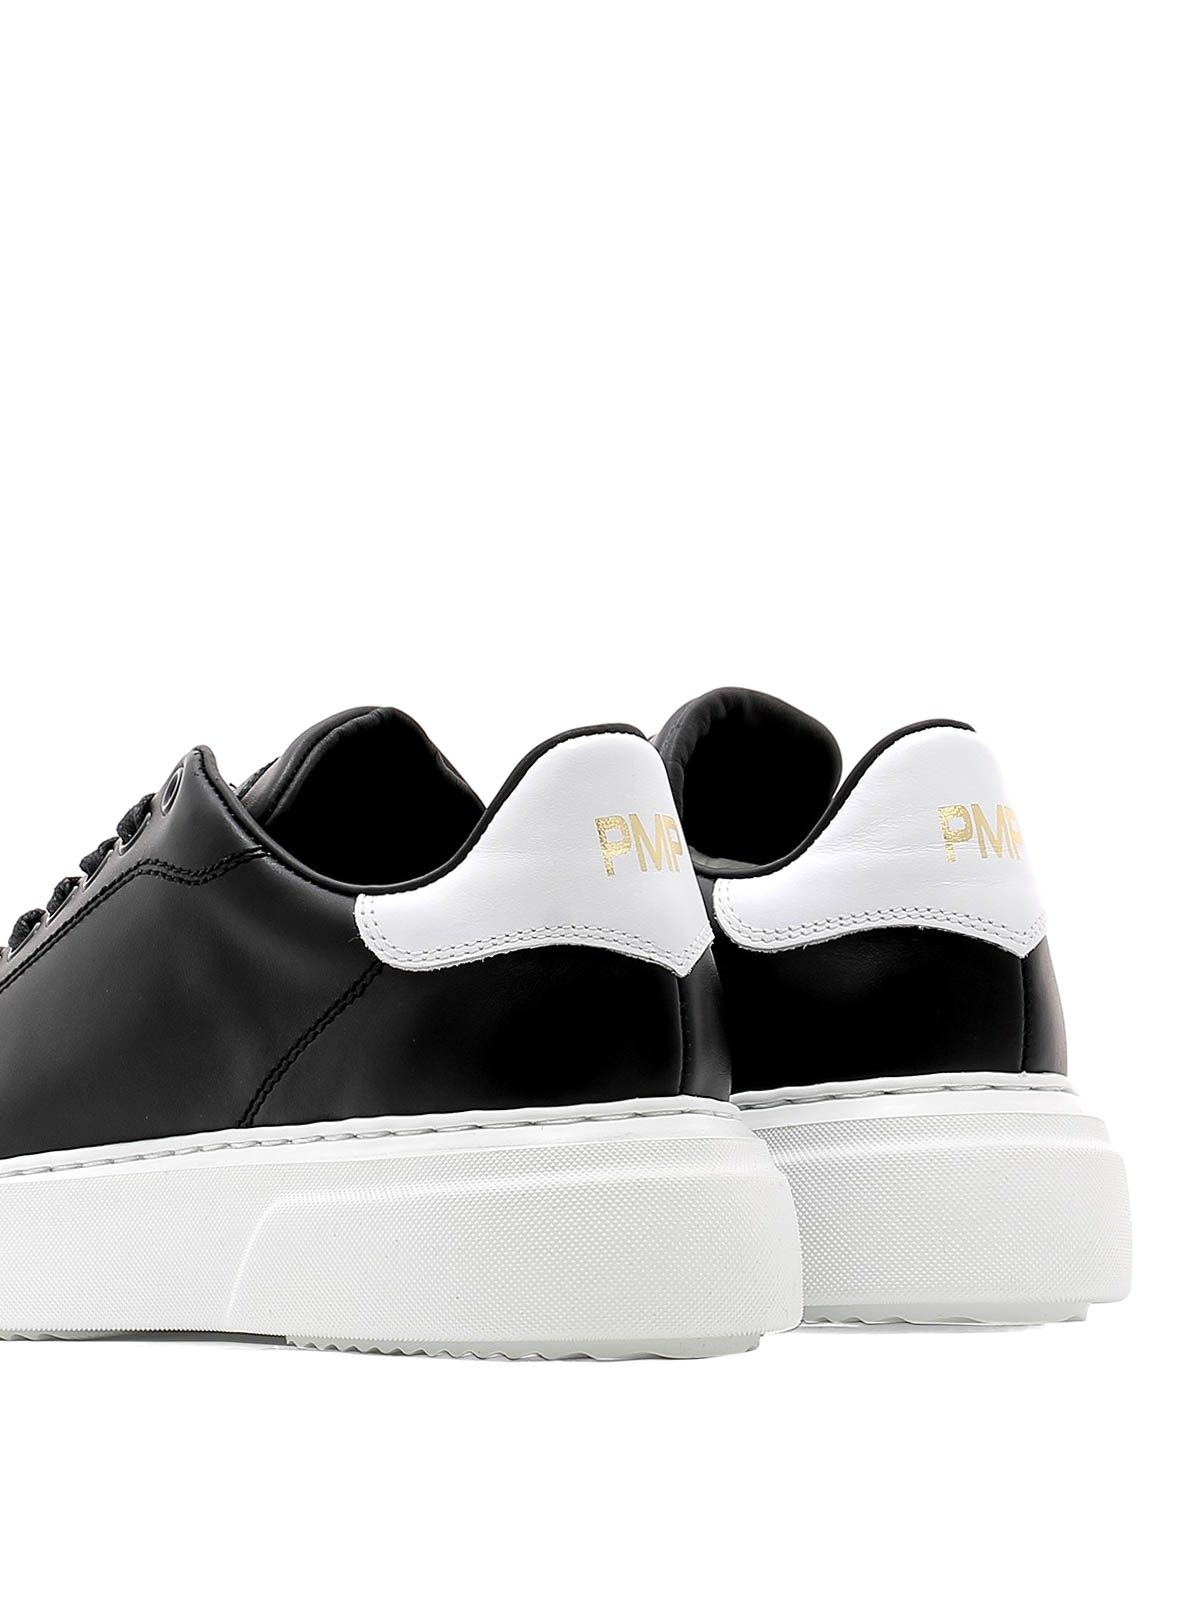 Trainers Philippe Model - Temple low top black leather sneakers 